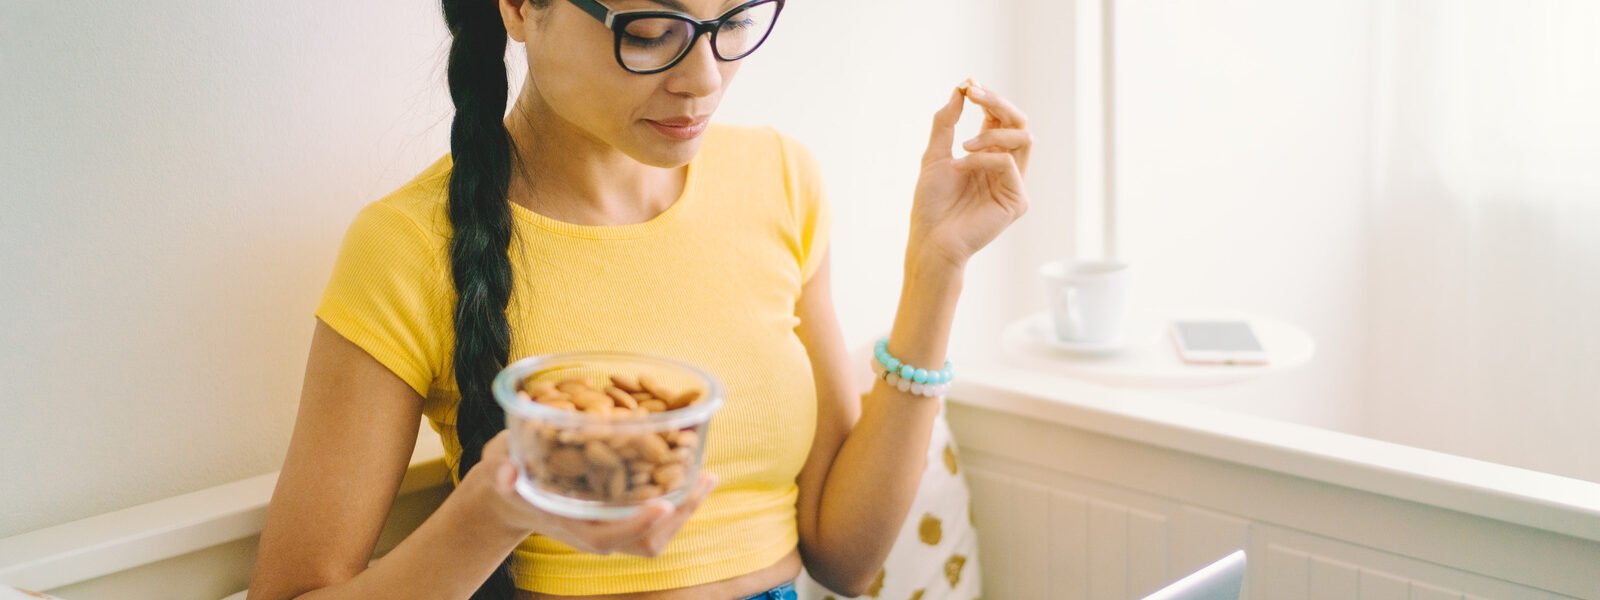 What Happens To Your Blood Pressure When You Eat Almonds Every Day - Health Digest